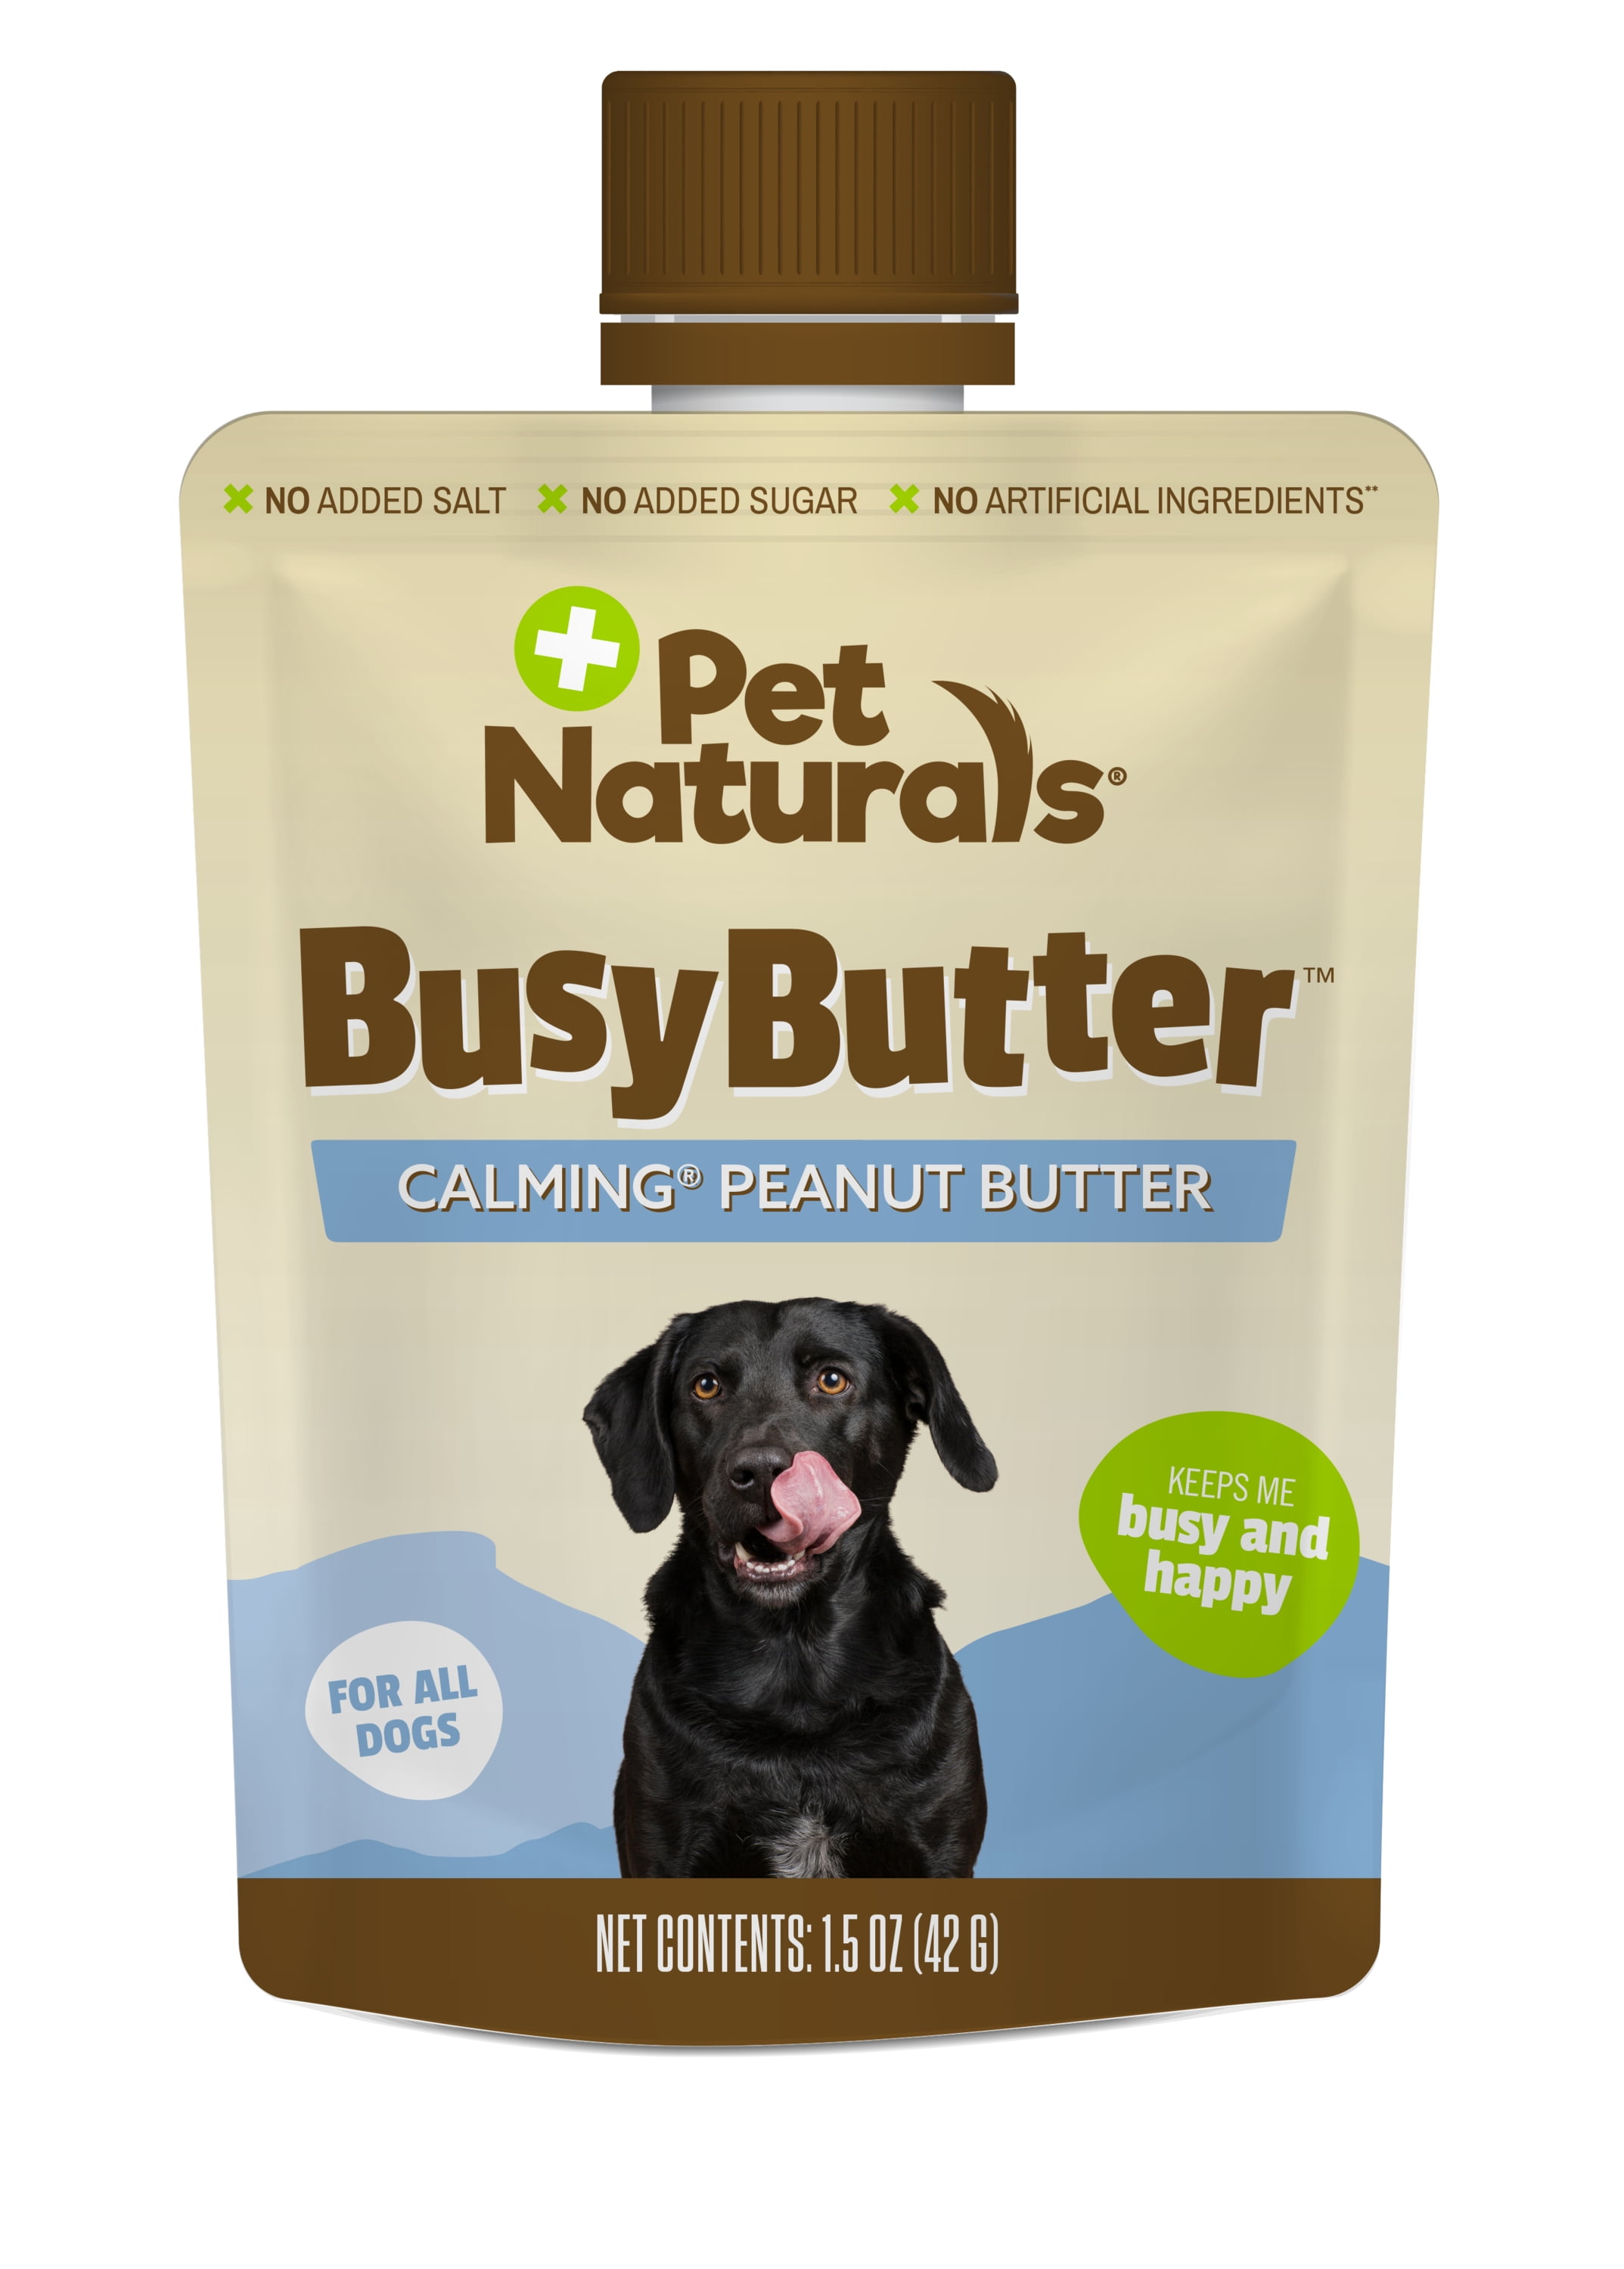 Pet Naturals Busybutter Calming Peanut Butter for Dogs, Stress and Anxiety Support, 1.5 oz.